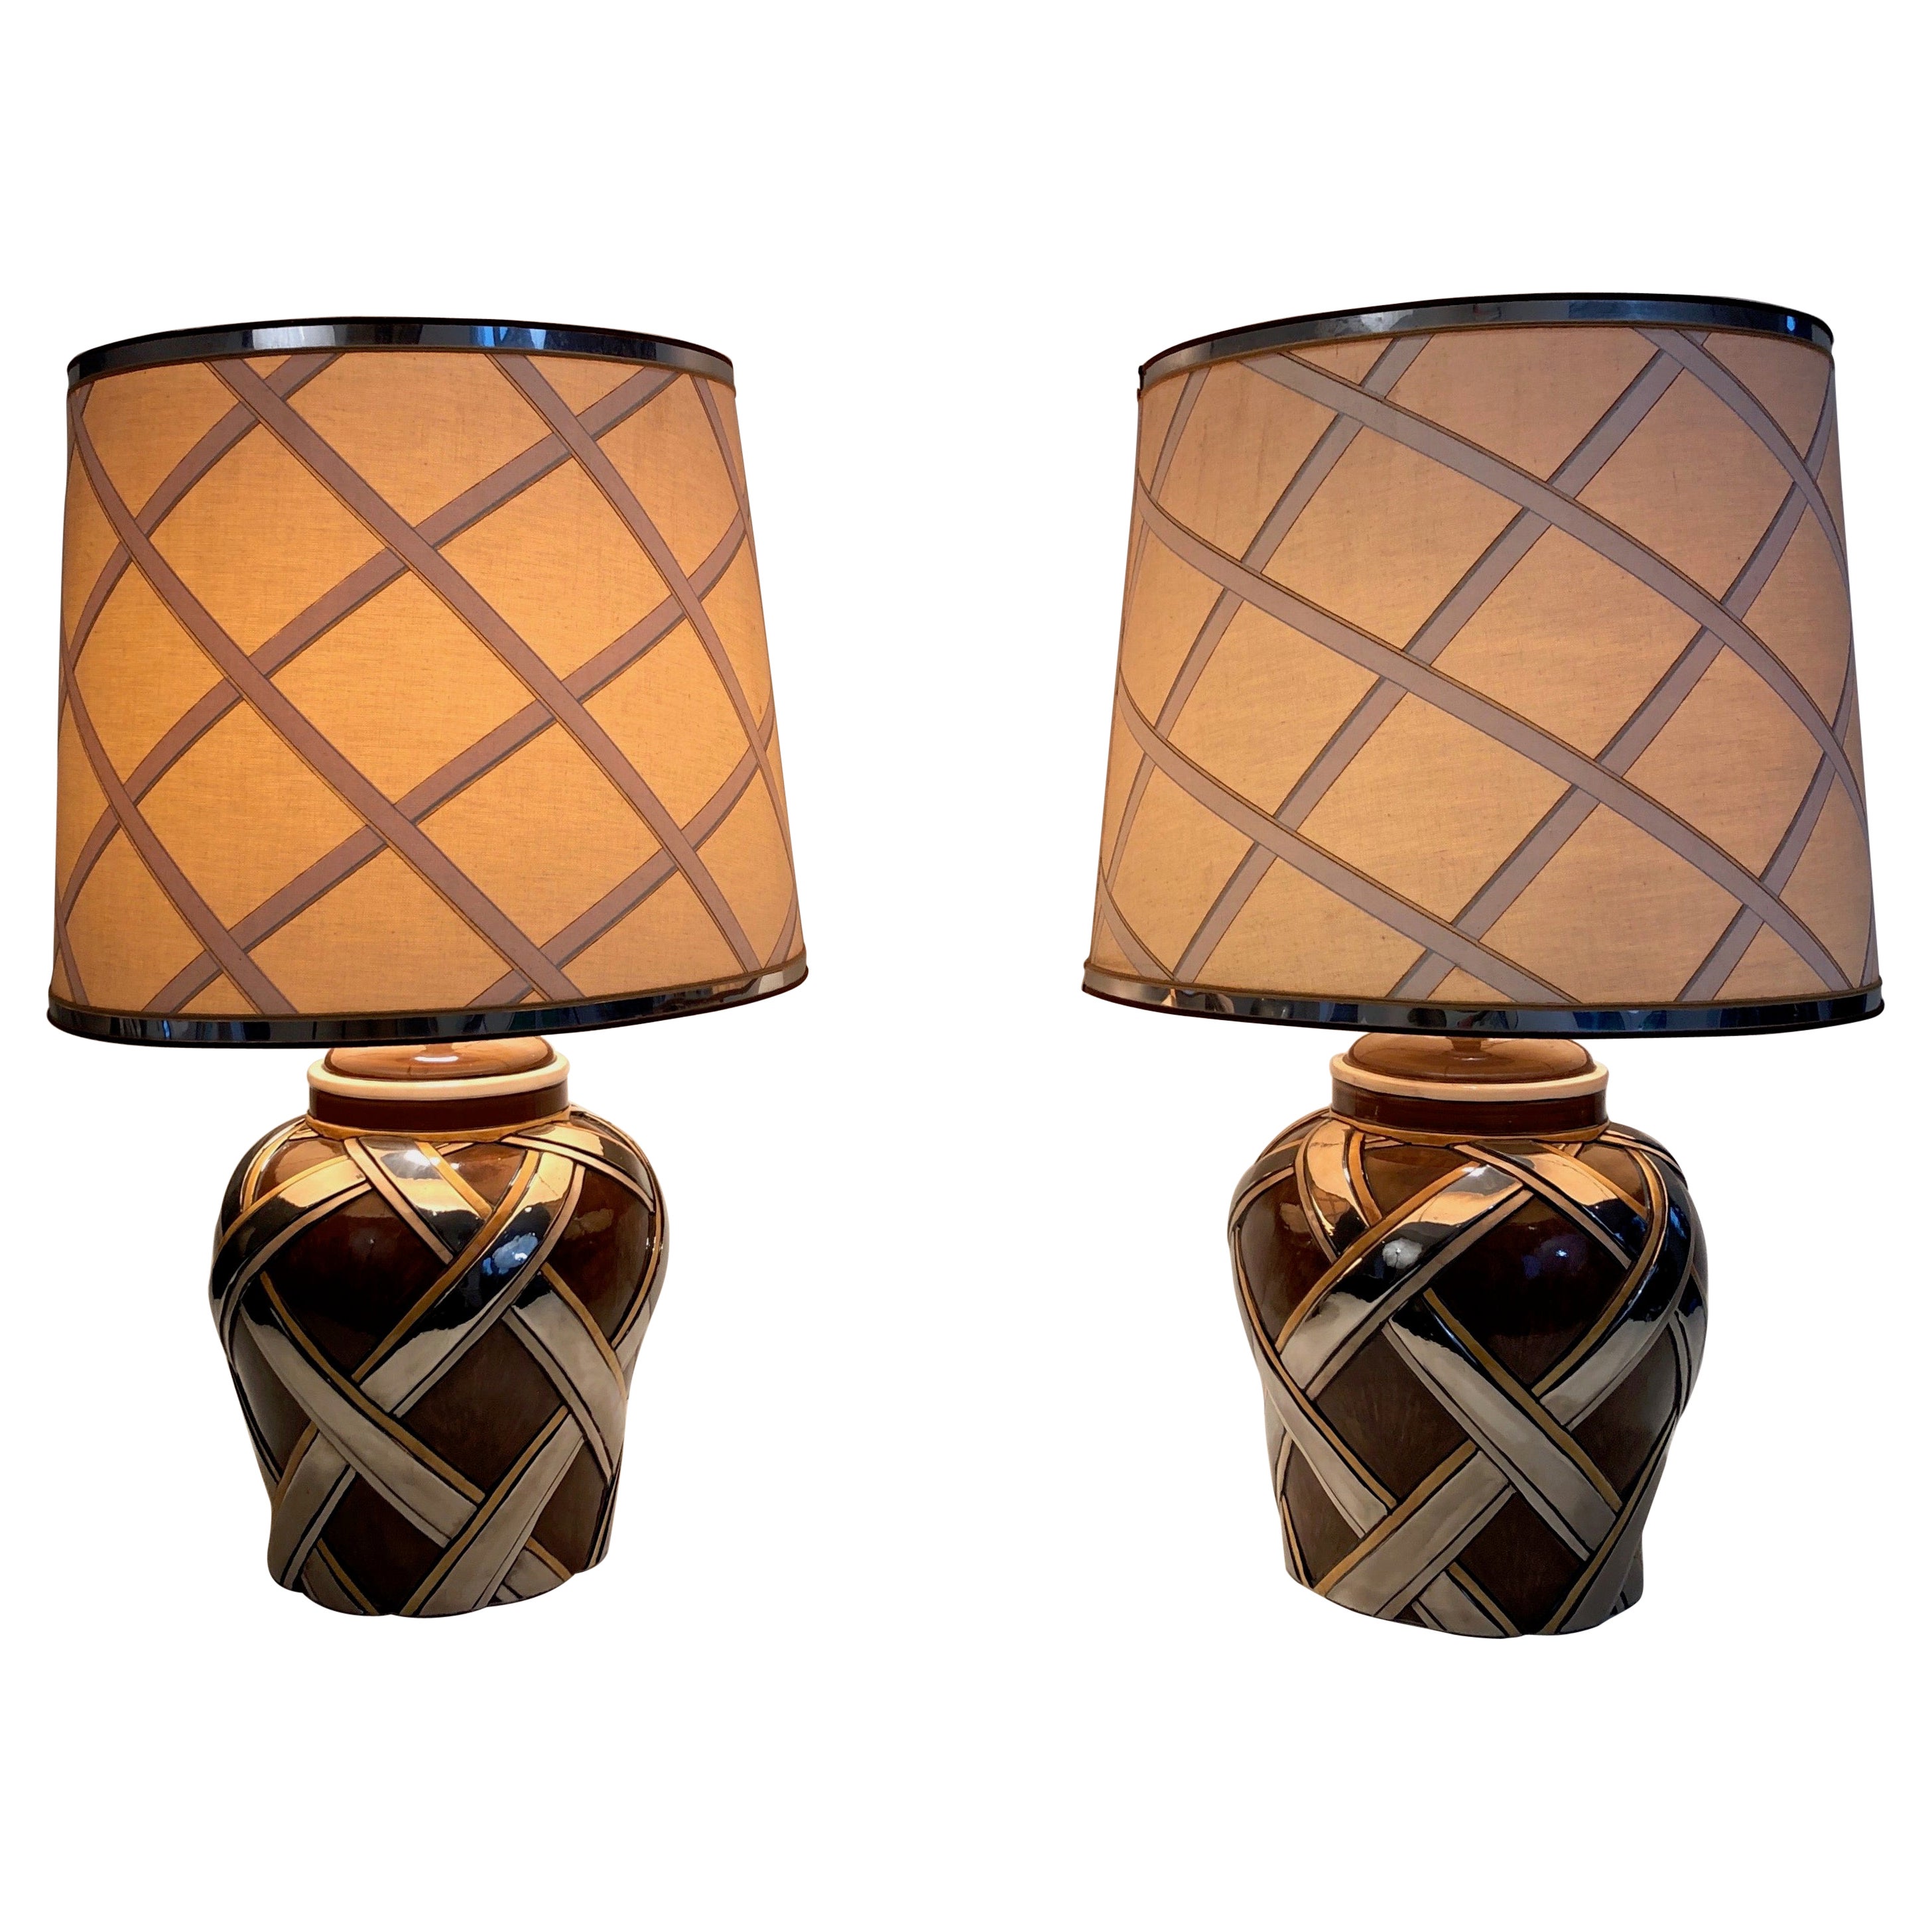 Important Pair of Ceramic Lamps with Ribbons Decor, French, Circa 1970 For Sale